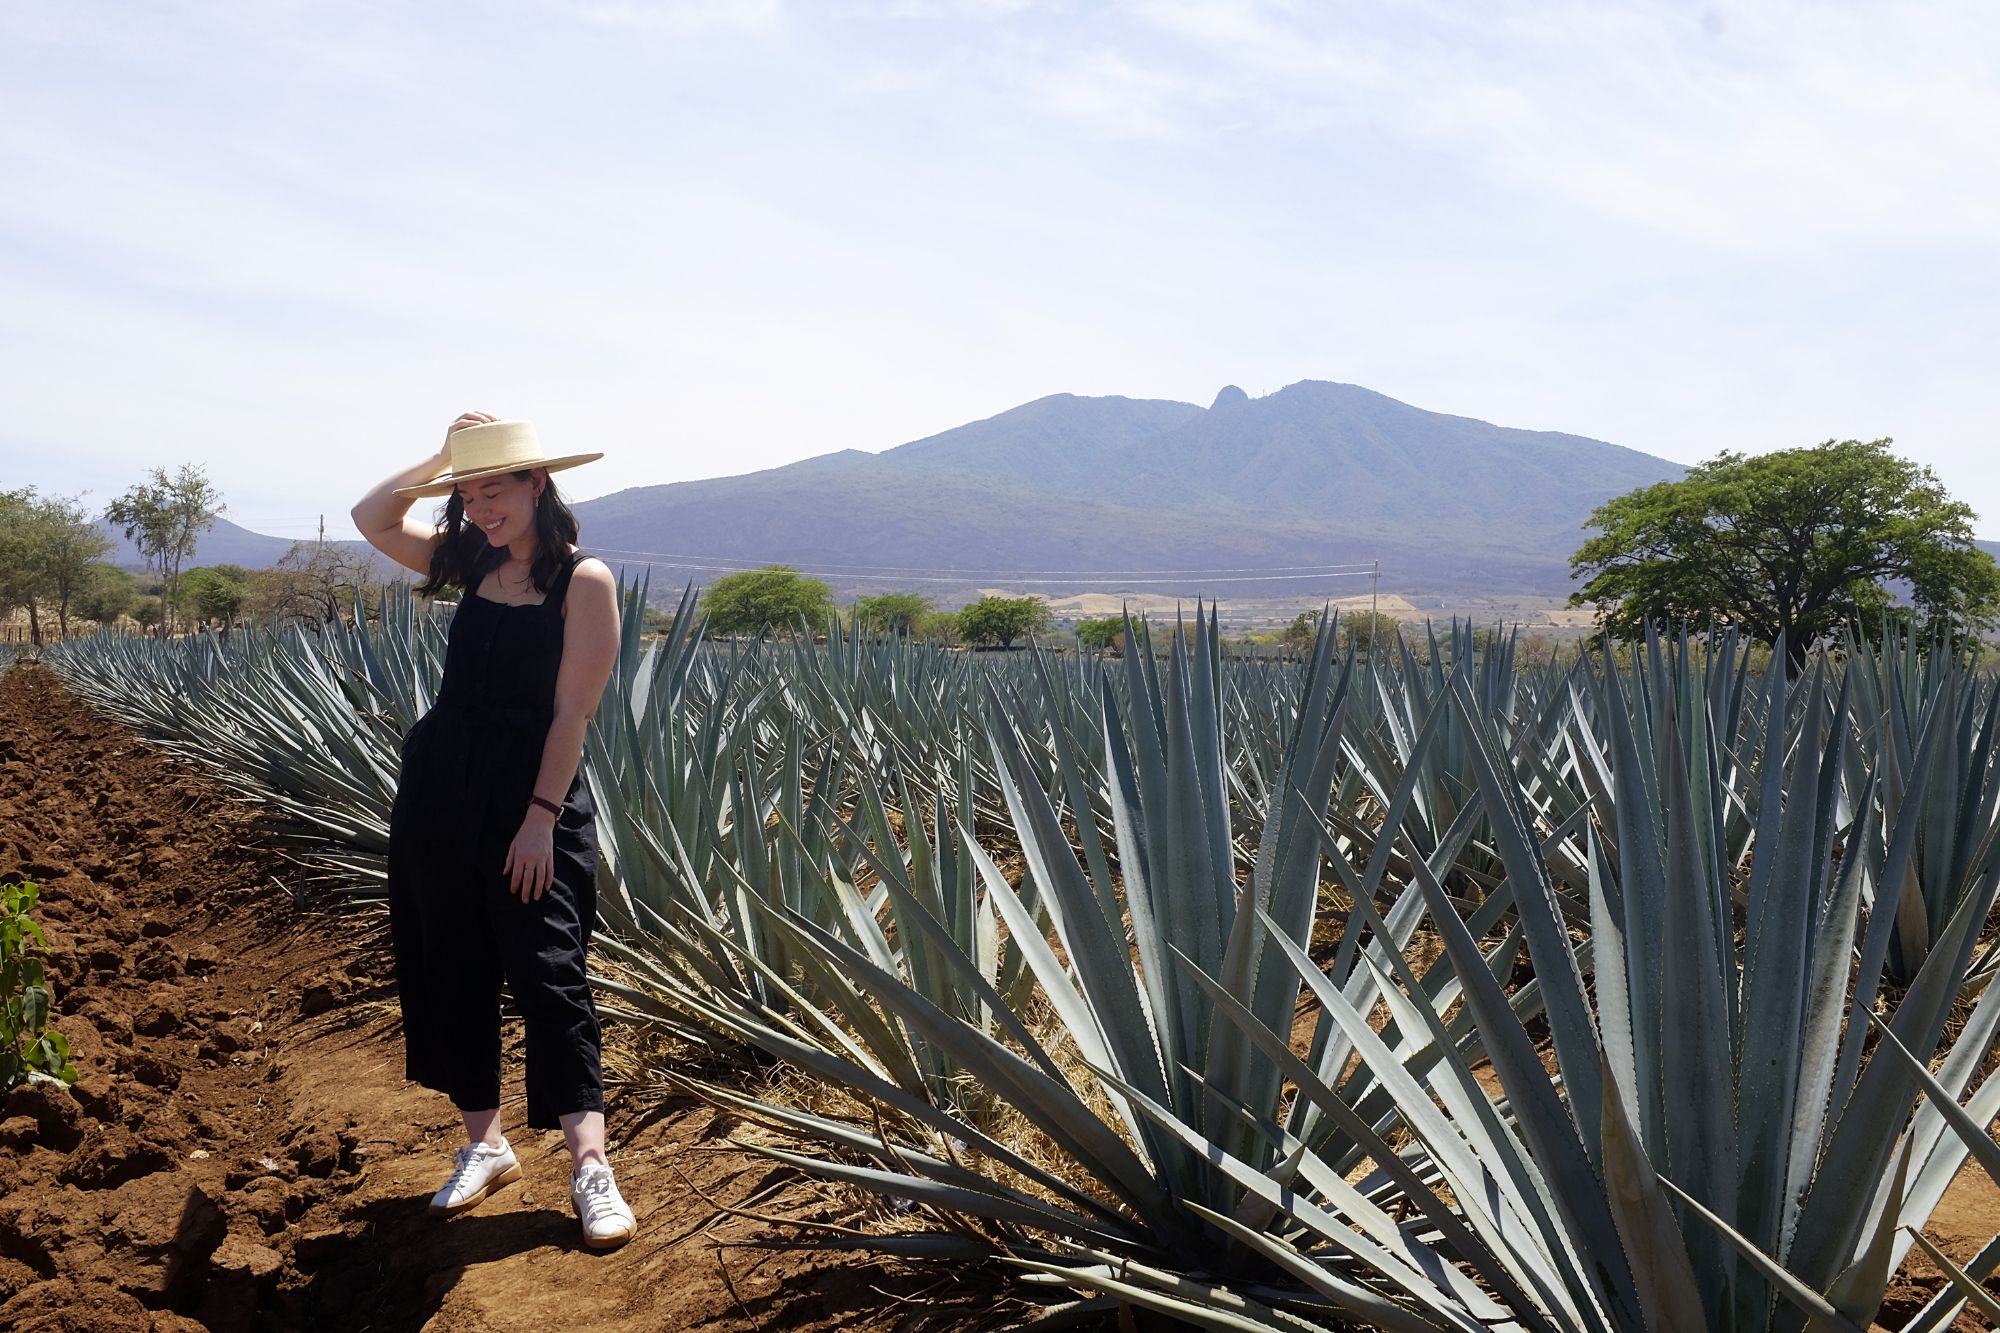 Alyssa stands in a field of agave